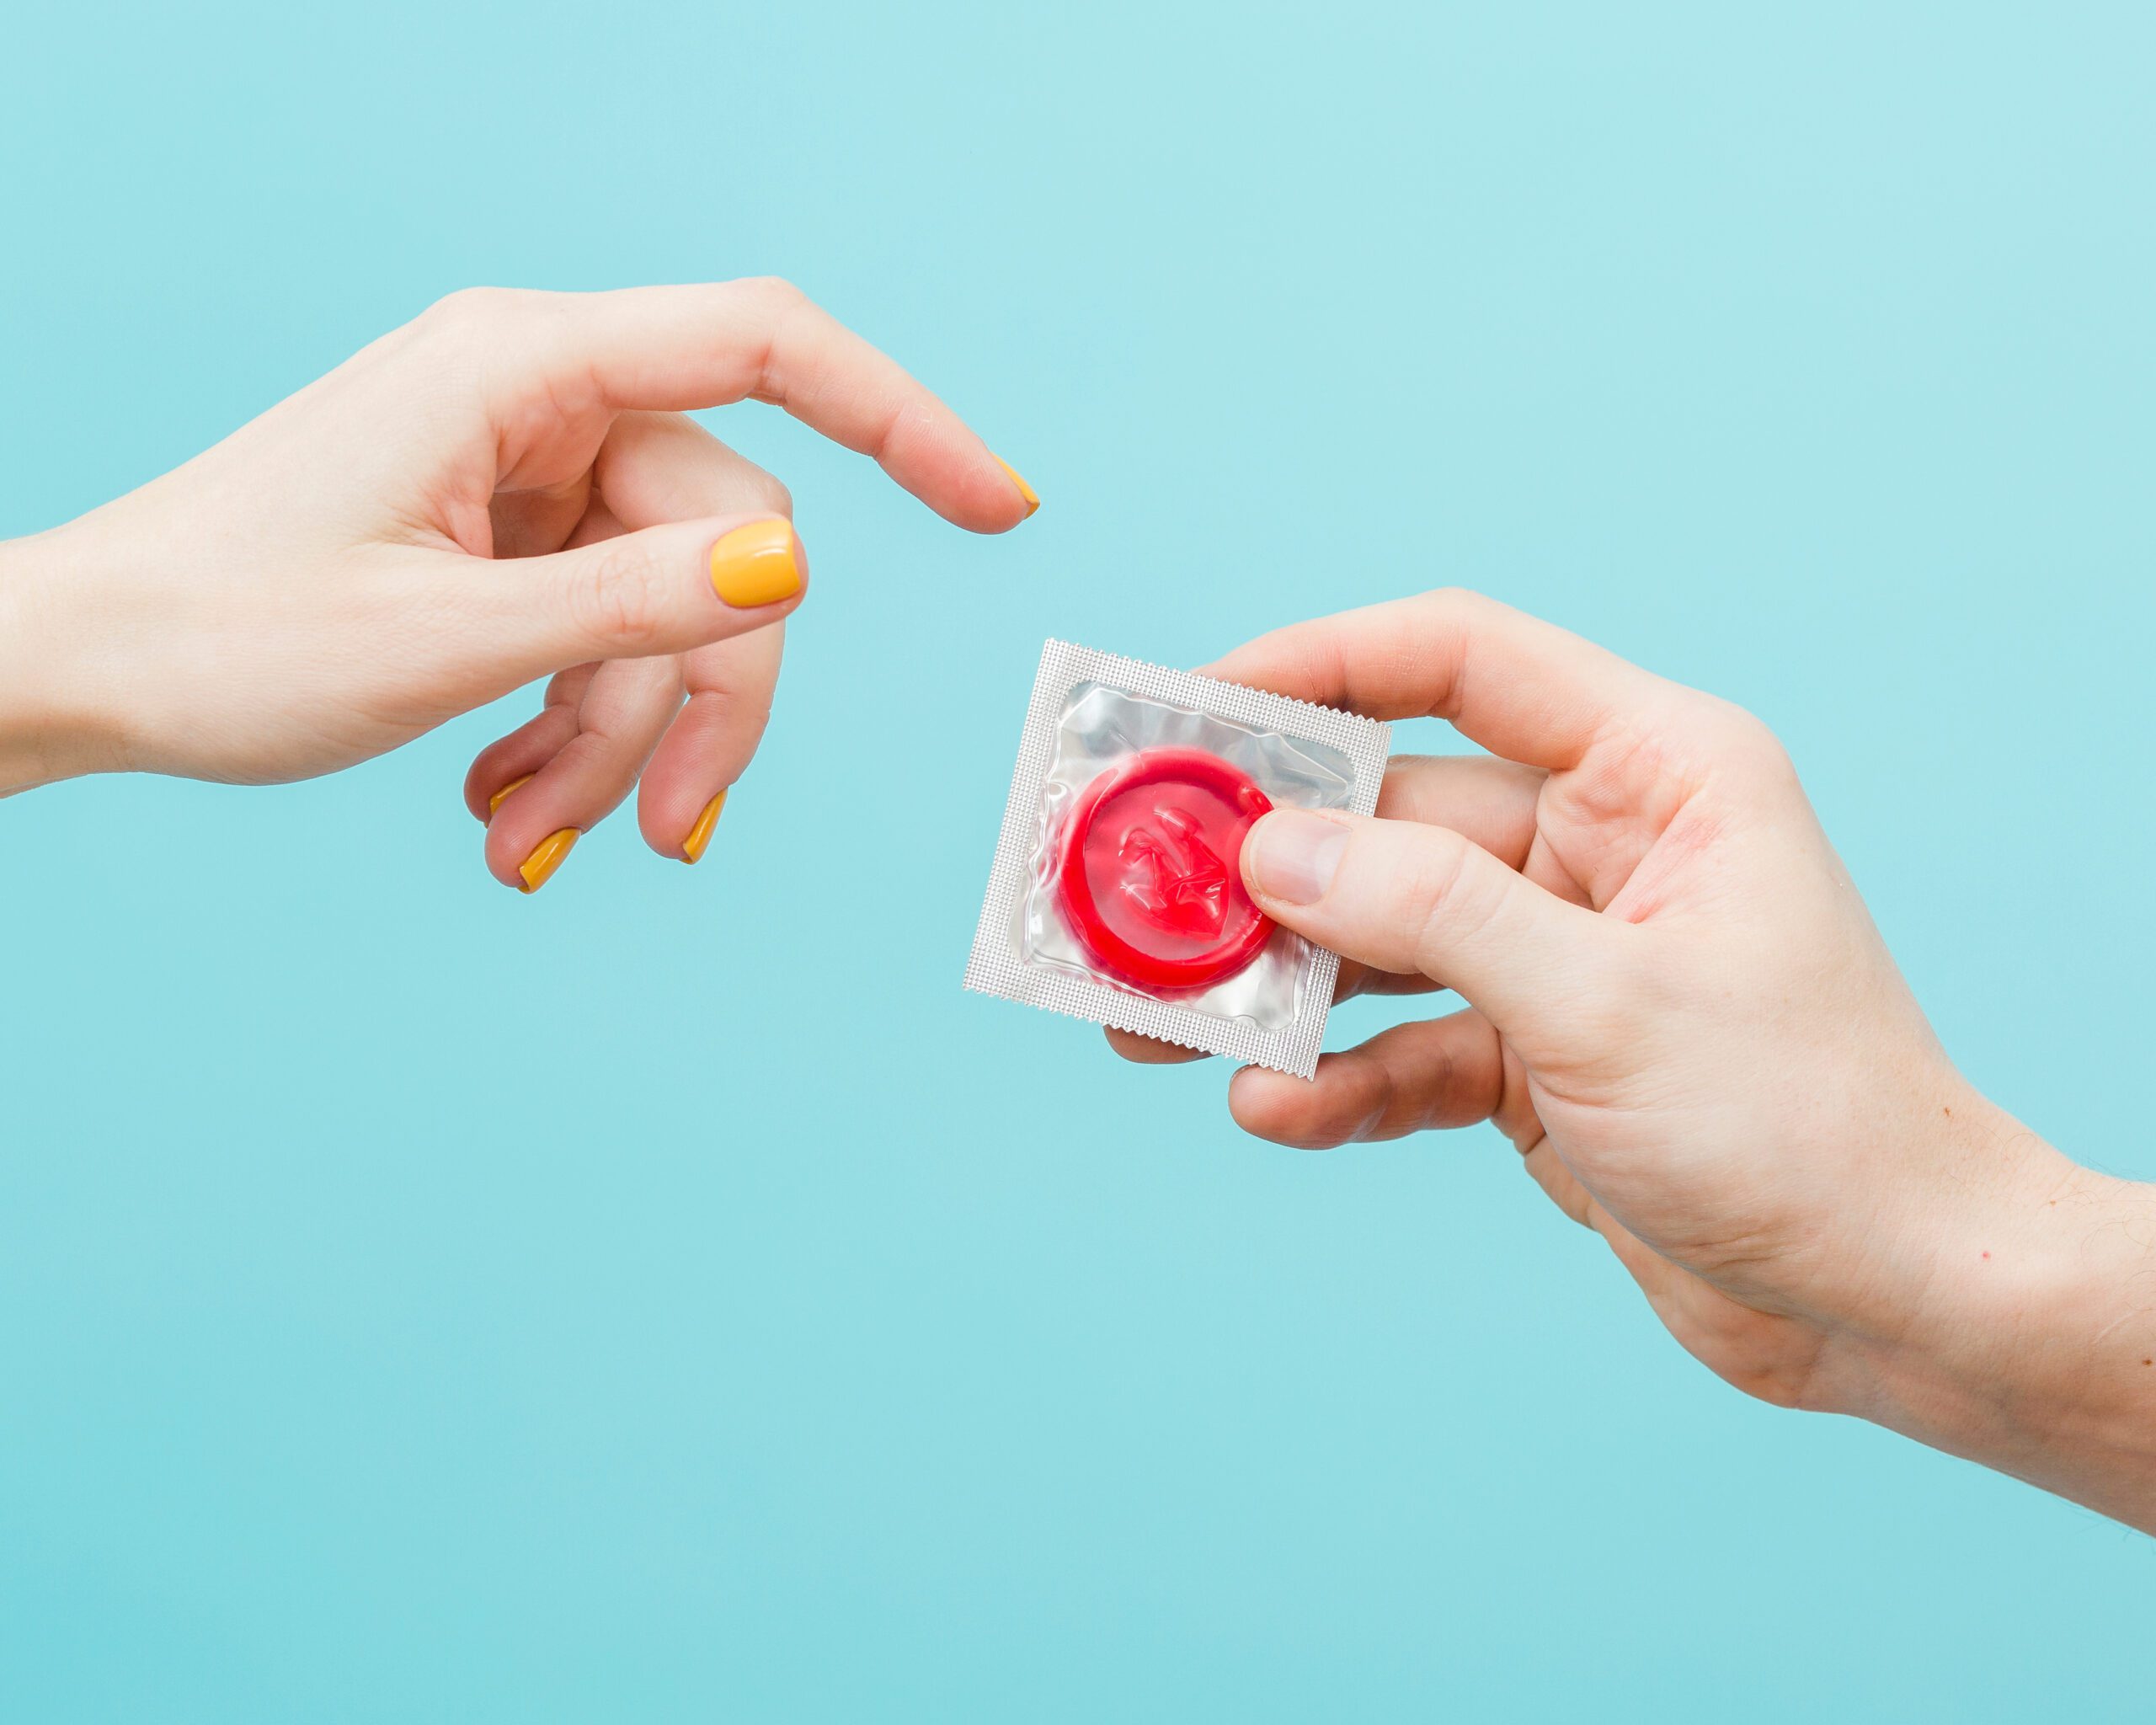 Tow hands on a blue background, one is handing the other a red condom in a clear condom wrapper.